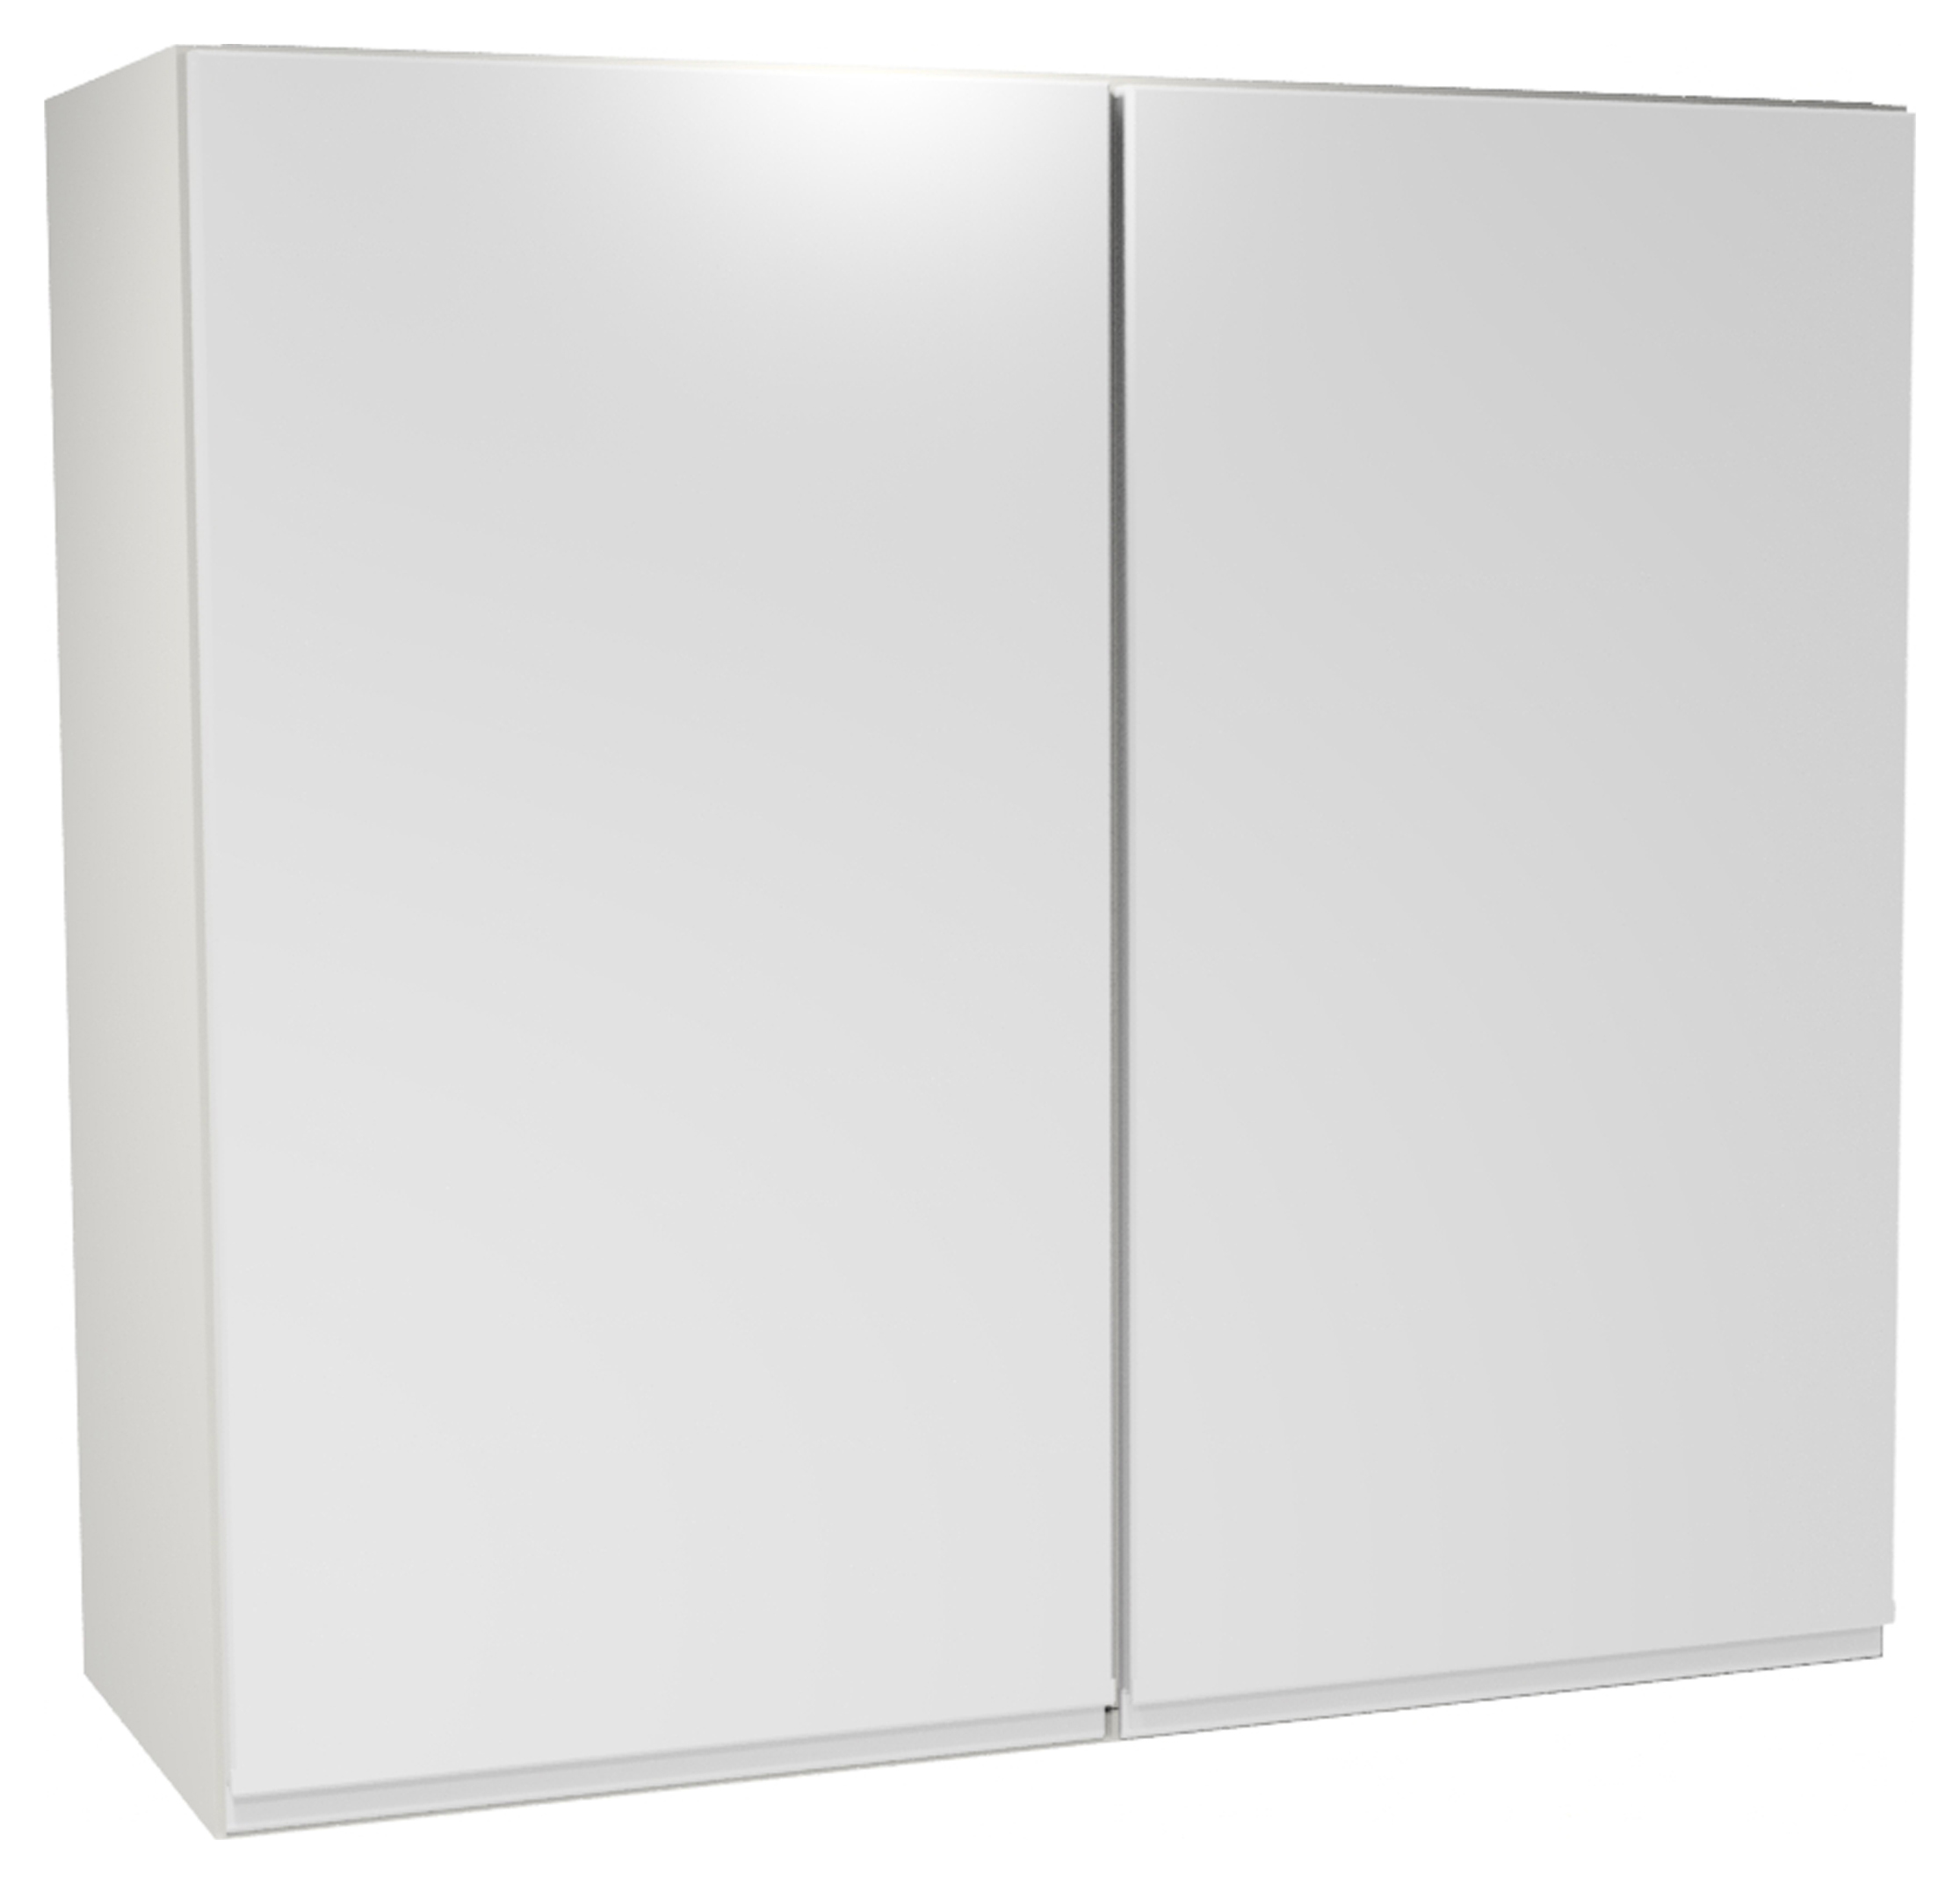 Image of Wickes Madison White Wall Unit - 800mm